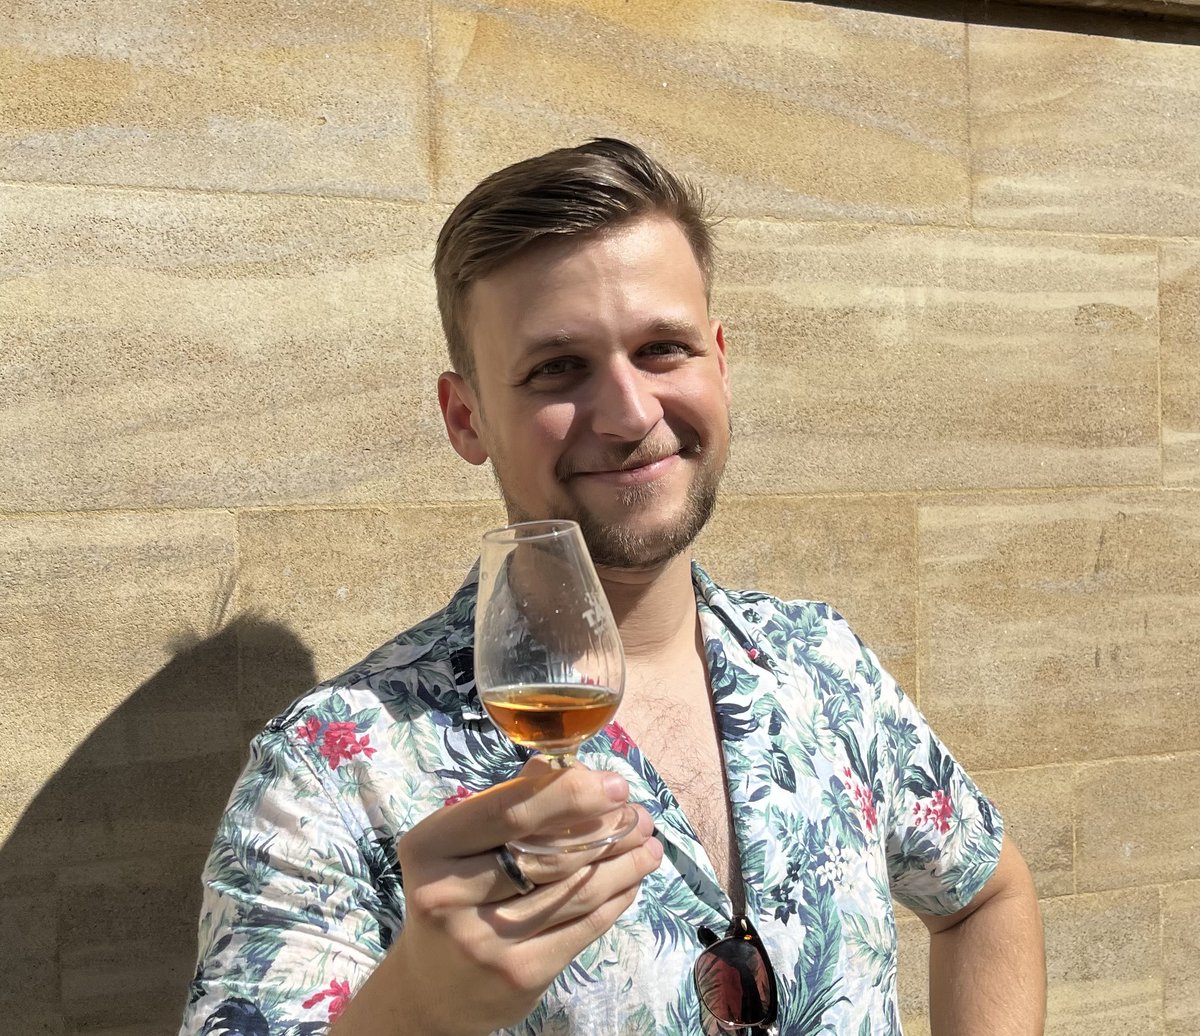 Meet the team: Introducing Matt 🥃 Matt joined The Whisky Shop Oxford in November 2019 whilst studying for his undergraduate degree in History. After a few years of learning (and tasting), Matt became Manager of the shop at the start of 2022.